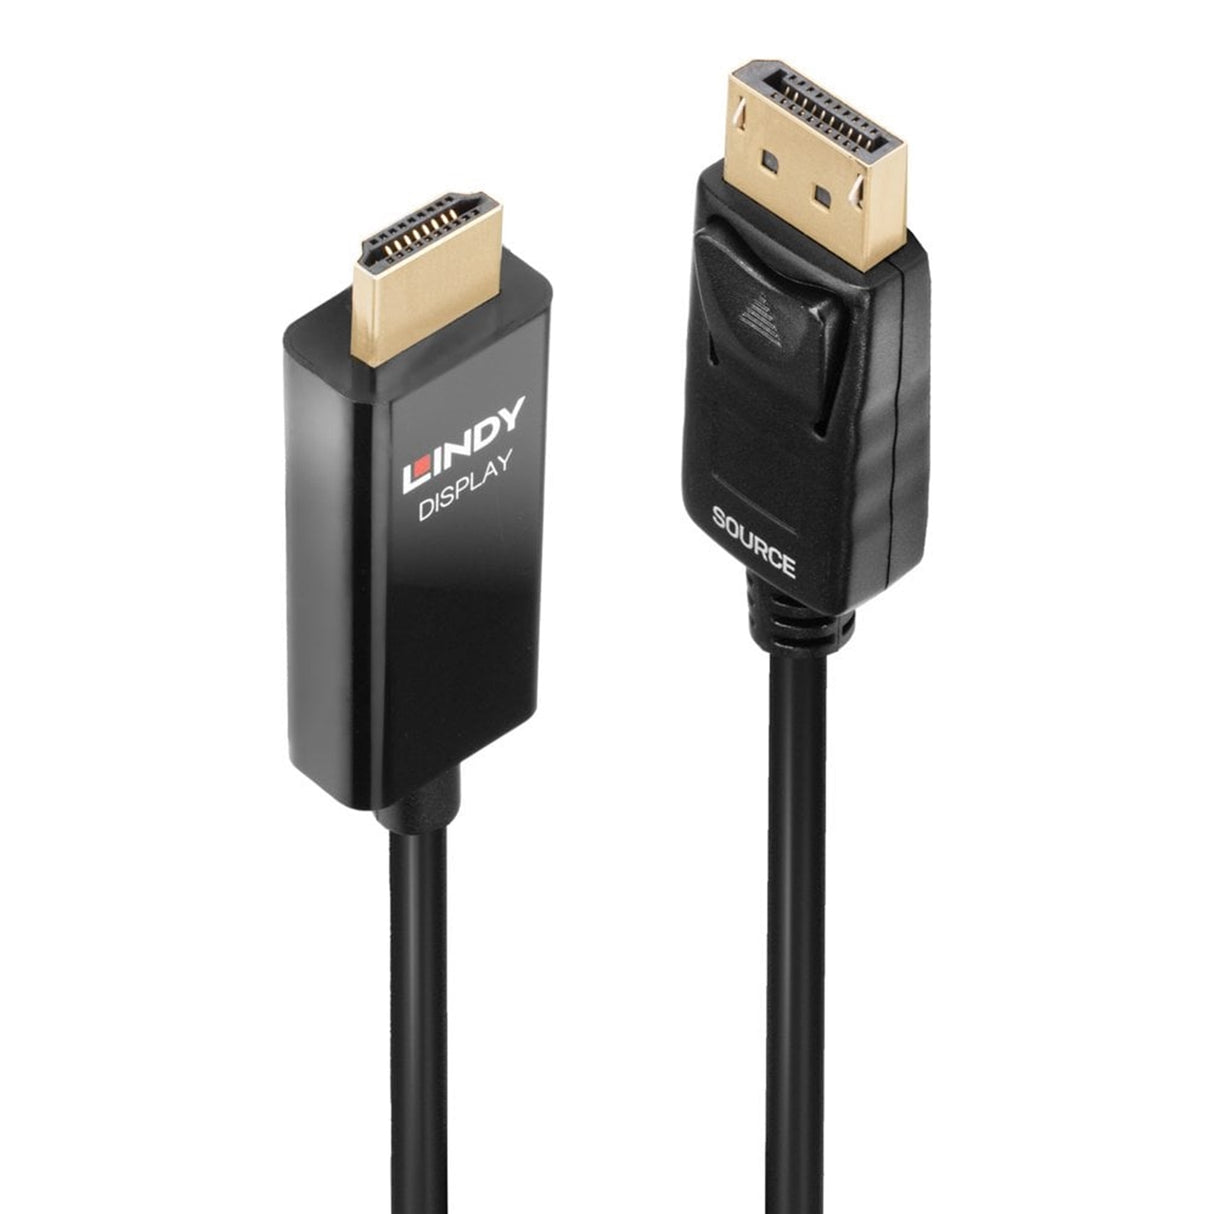 5m High Speed HDMI Cable, Cromo Line - from LINDY UK